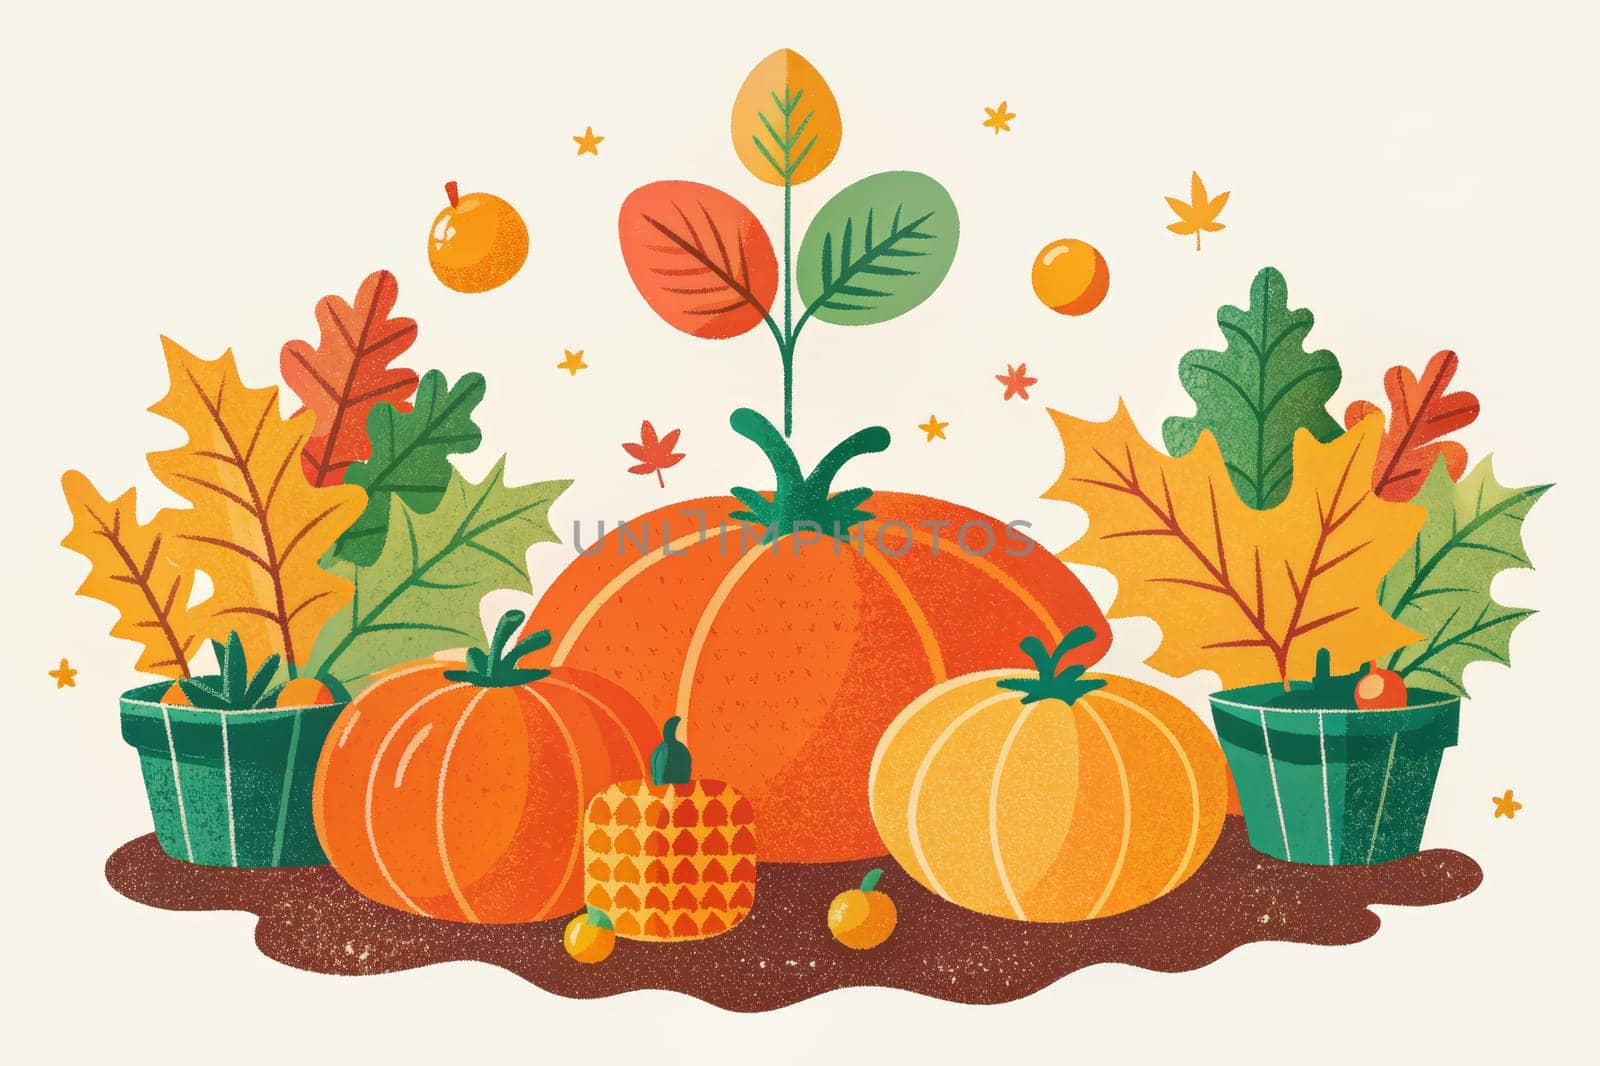 A cheerful arrangement of pumpkins in various sizes and colors sits amongst fall foliage and potted plants. Autumn leaves in warm shades of red, orange, and yellow add to the festive ambiance, while scattered confetti-like dots in vibrant hues complete the scene.